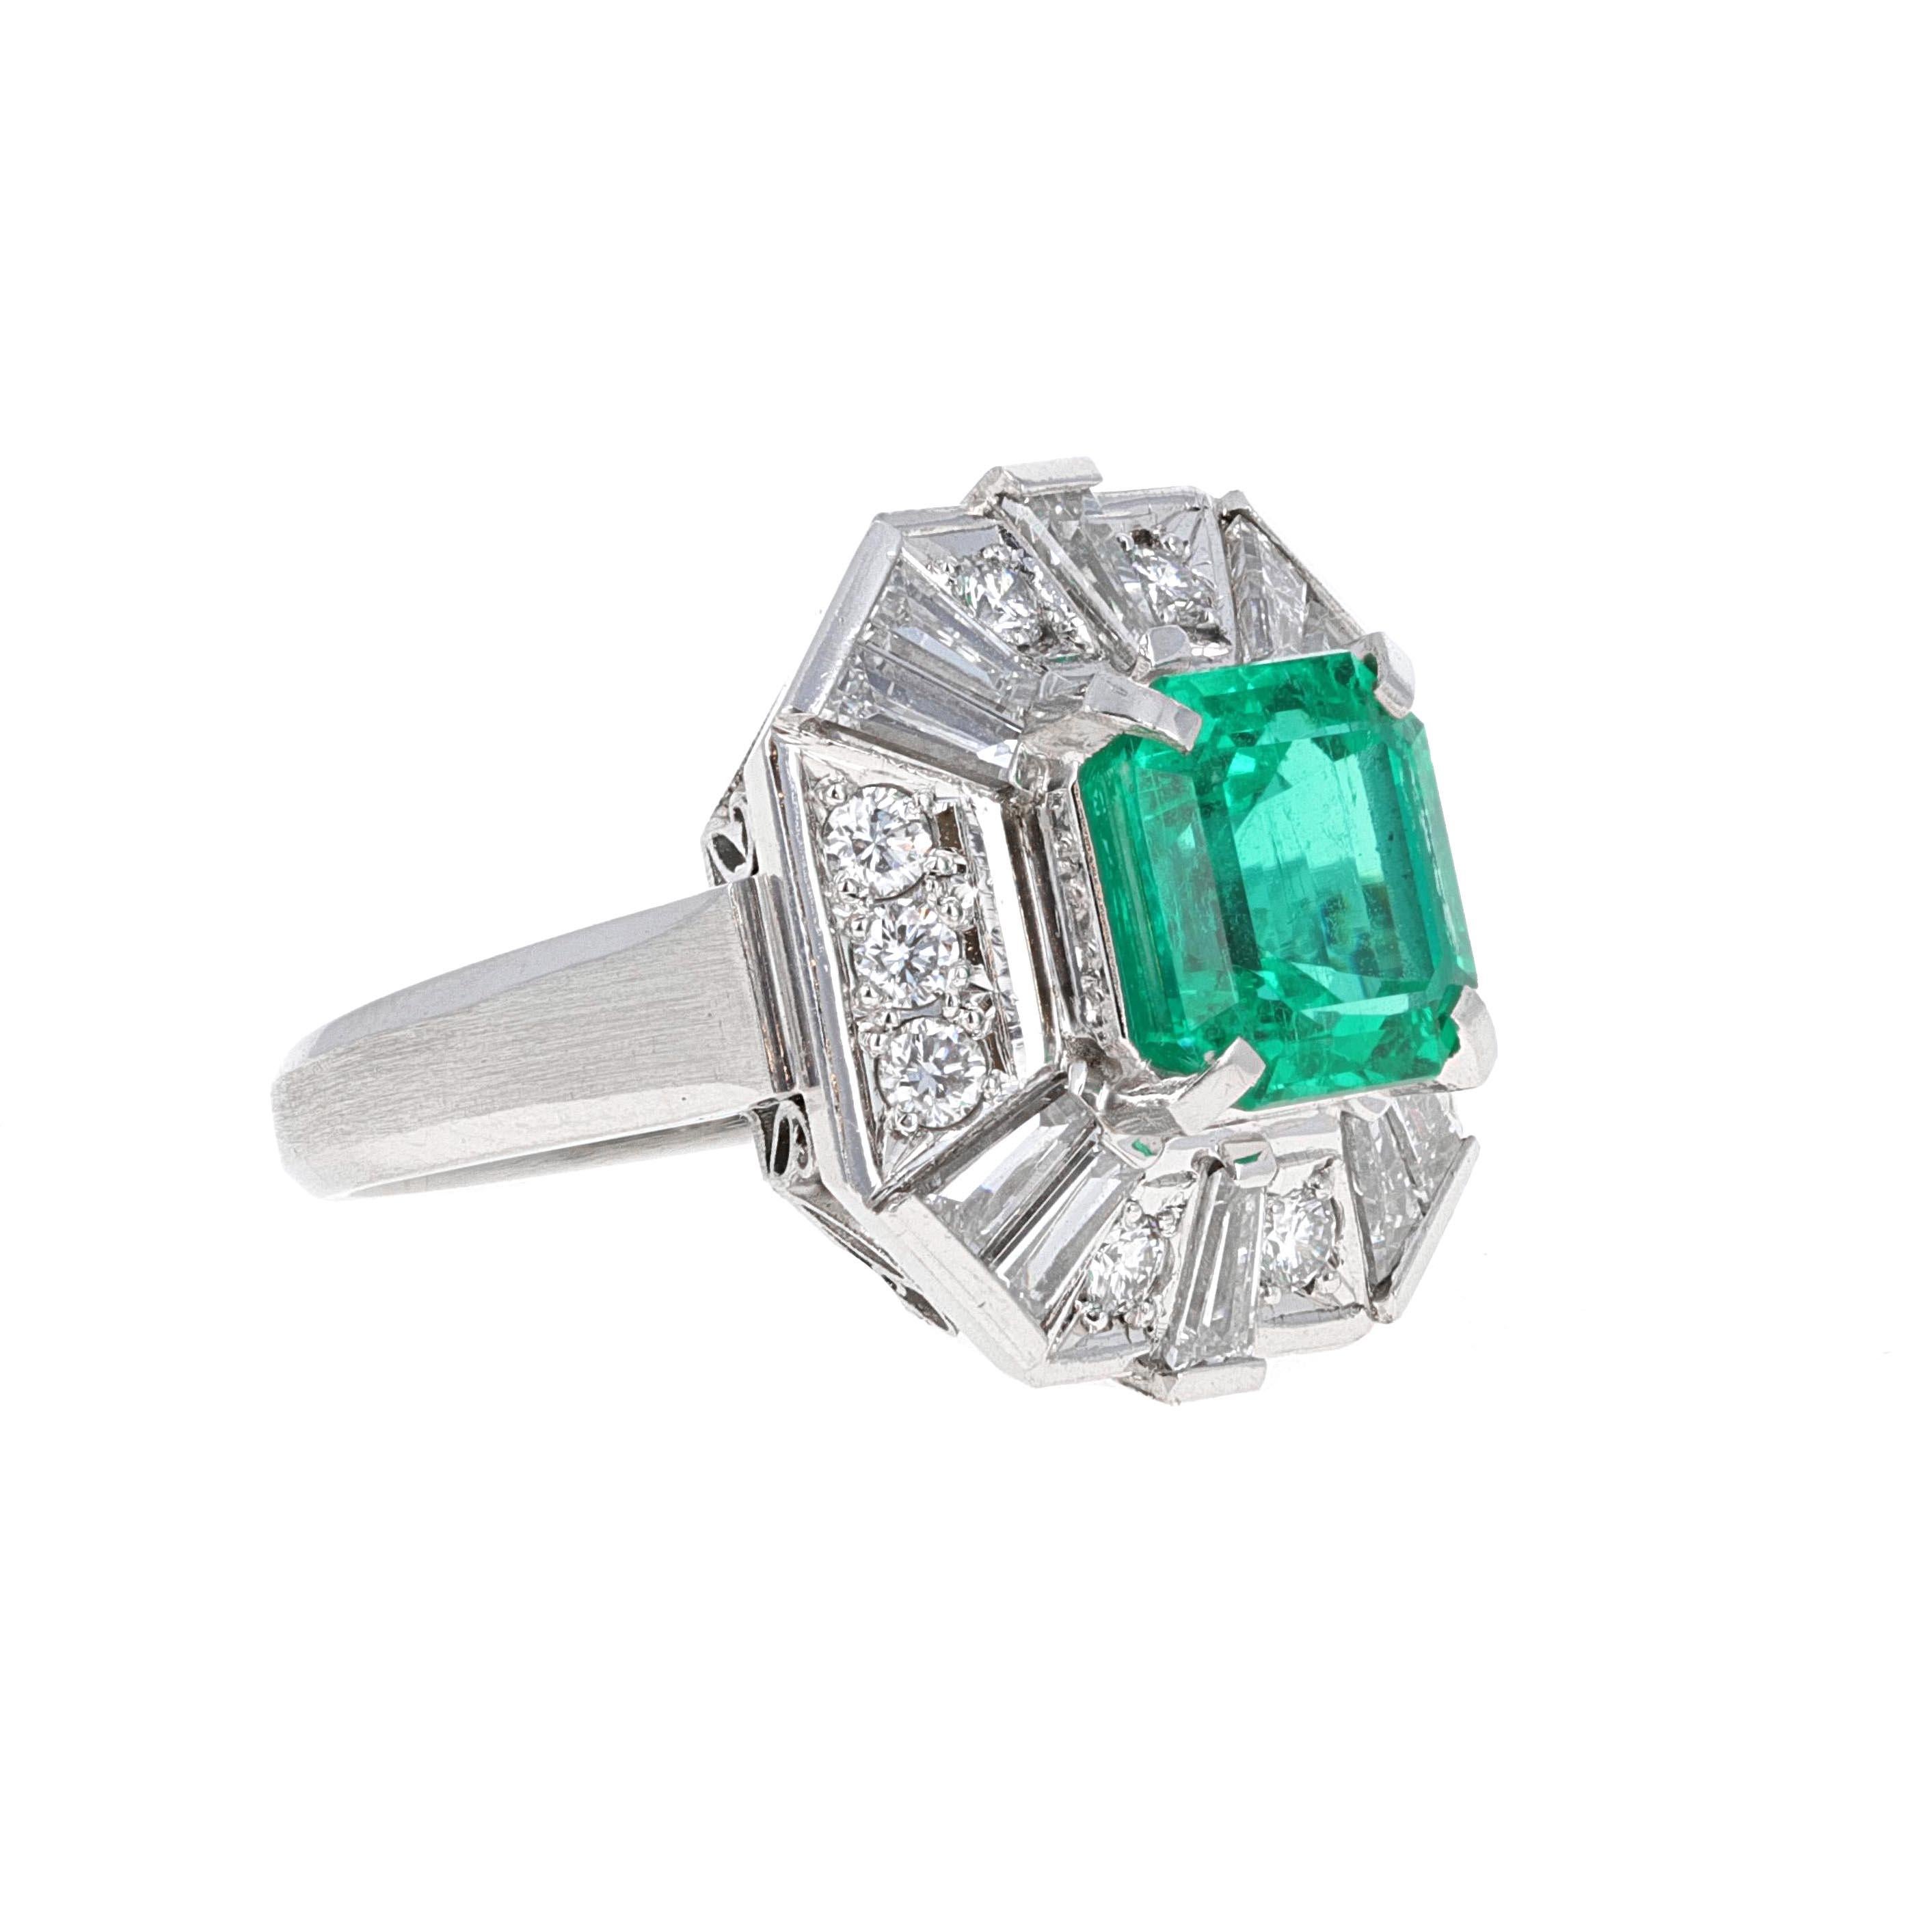 Beautifully hand made 2.58 carat Columbian Emerald and diamond cocktail ring. The emerald is an emerald cut and is surrounded by 20 white diamonds weighing a total of 1.17 carats. The diamonds in the mounting are round brilliants and baguettes.